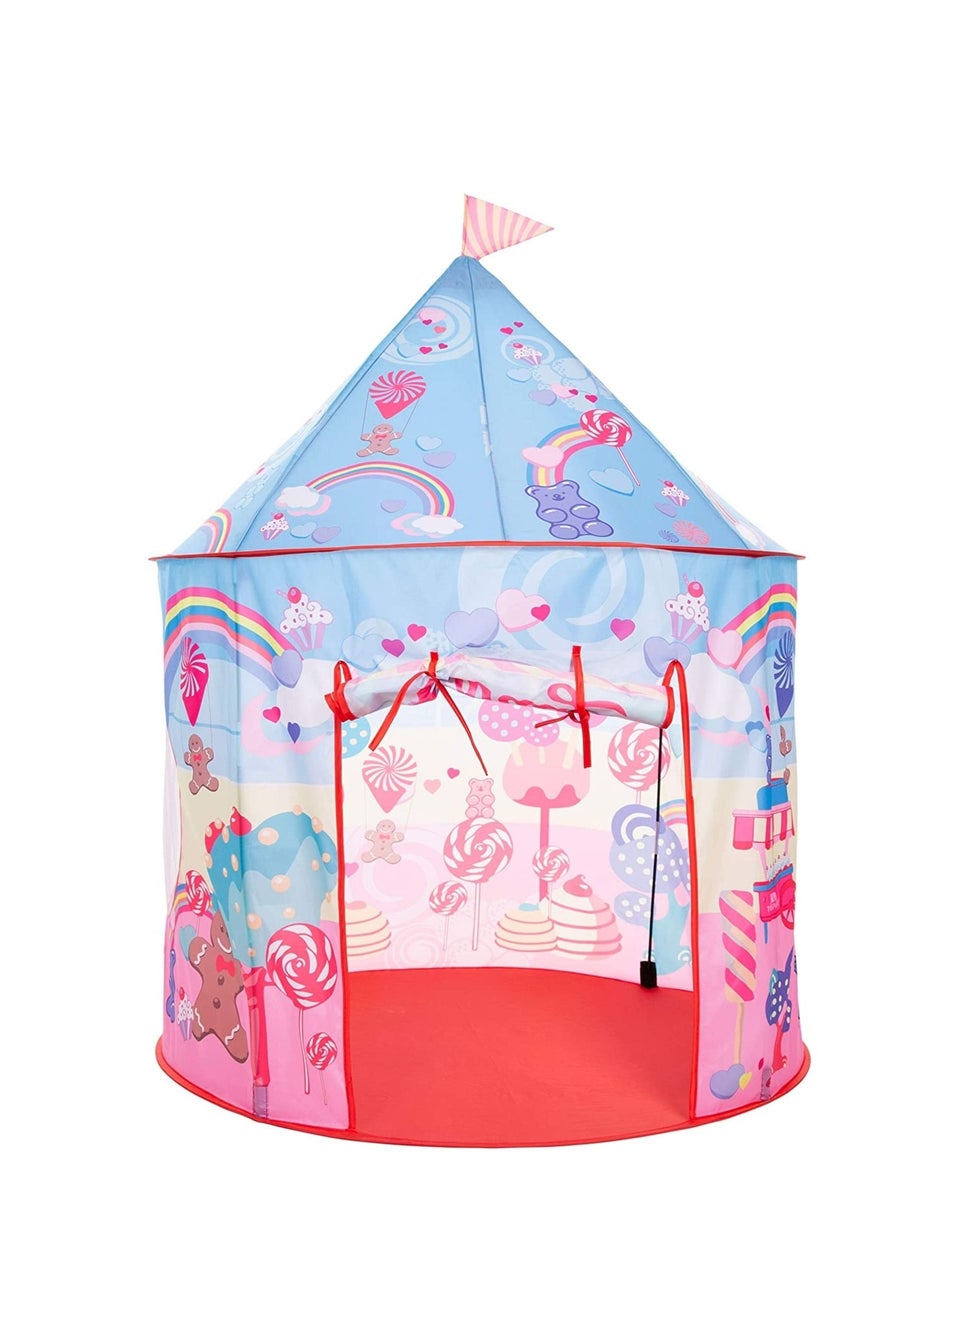 Trespass Kids Multi Chateau Play Tent With Packaway Bag